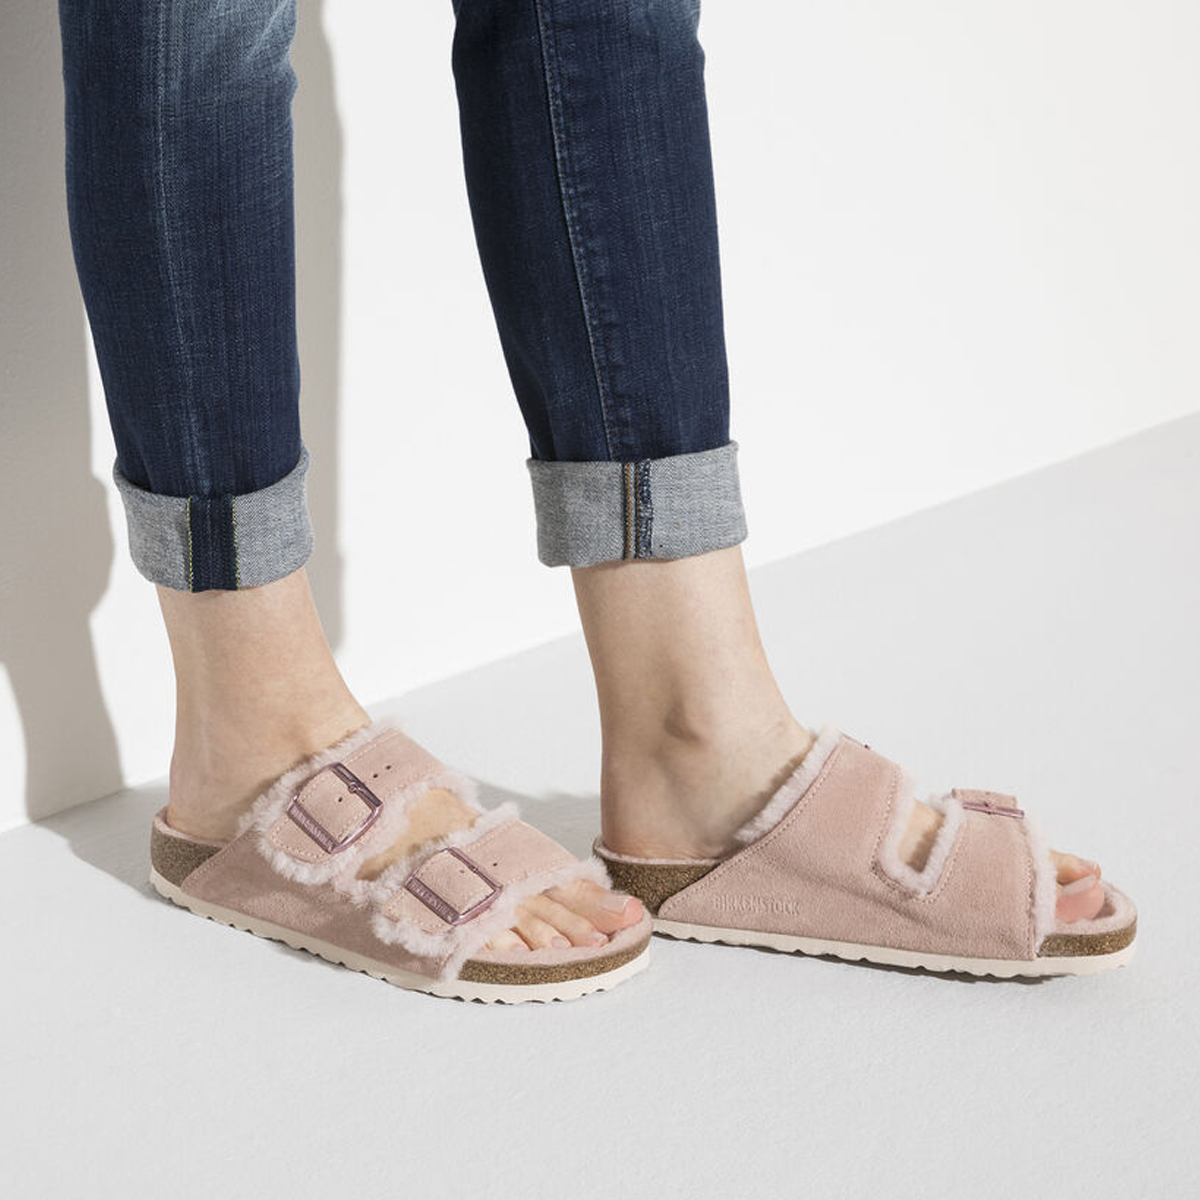 These $220 shearling Birkenstocks are trending for fall — but they're  selling out